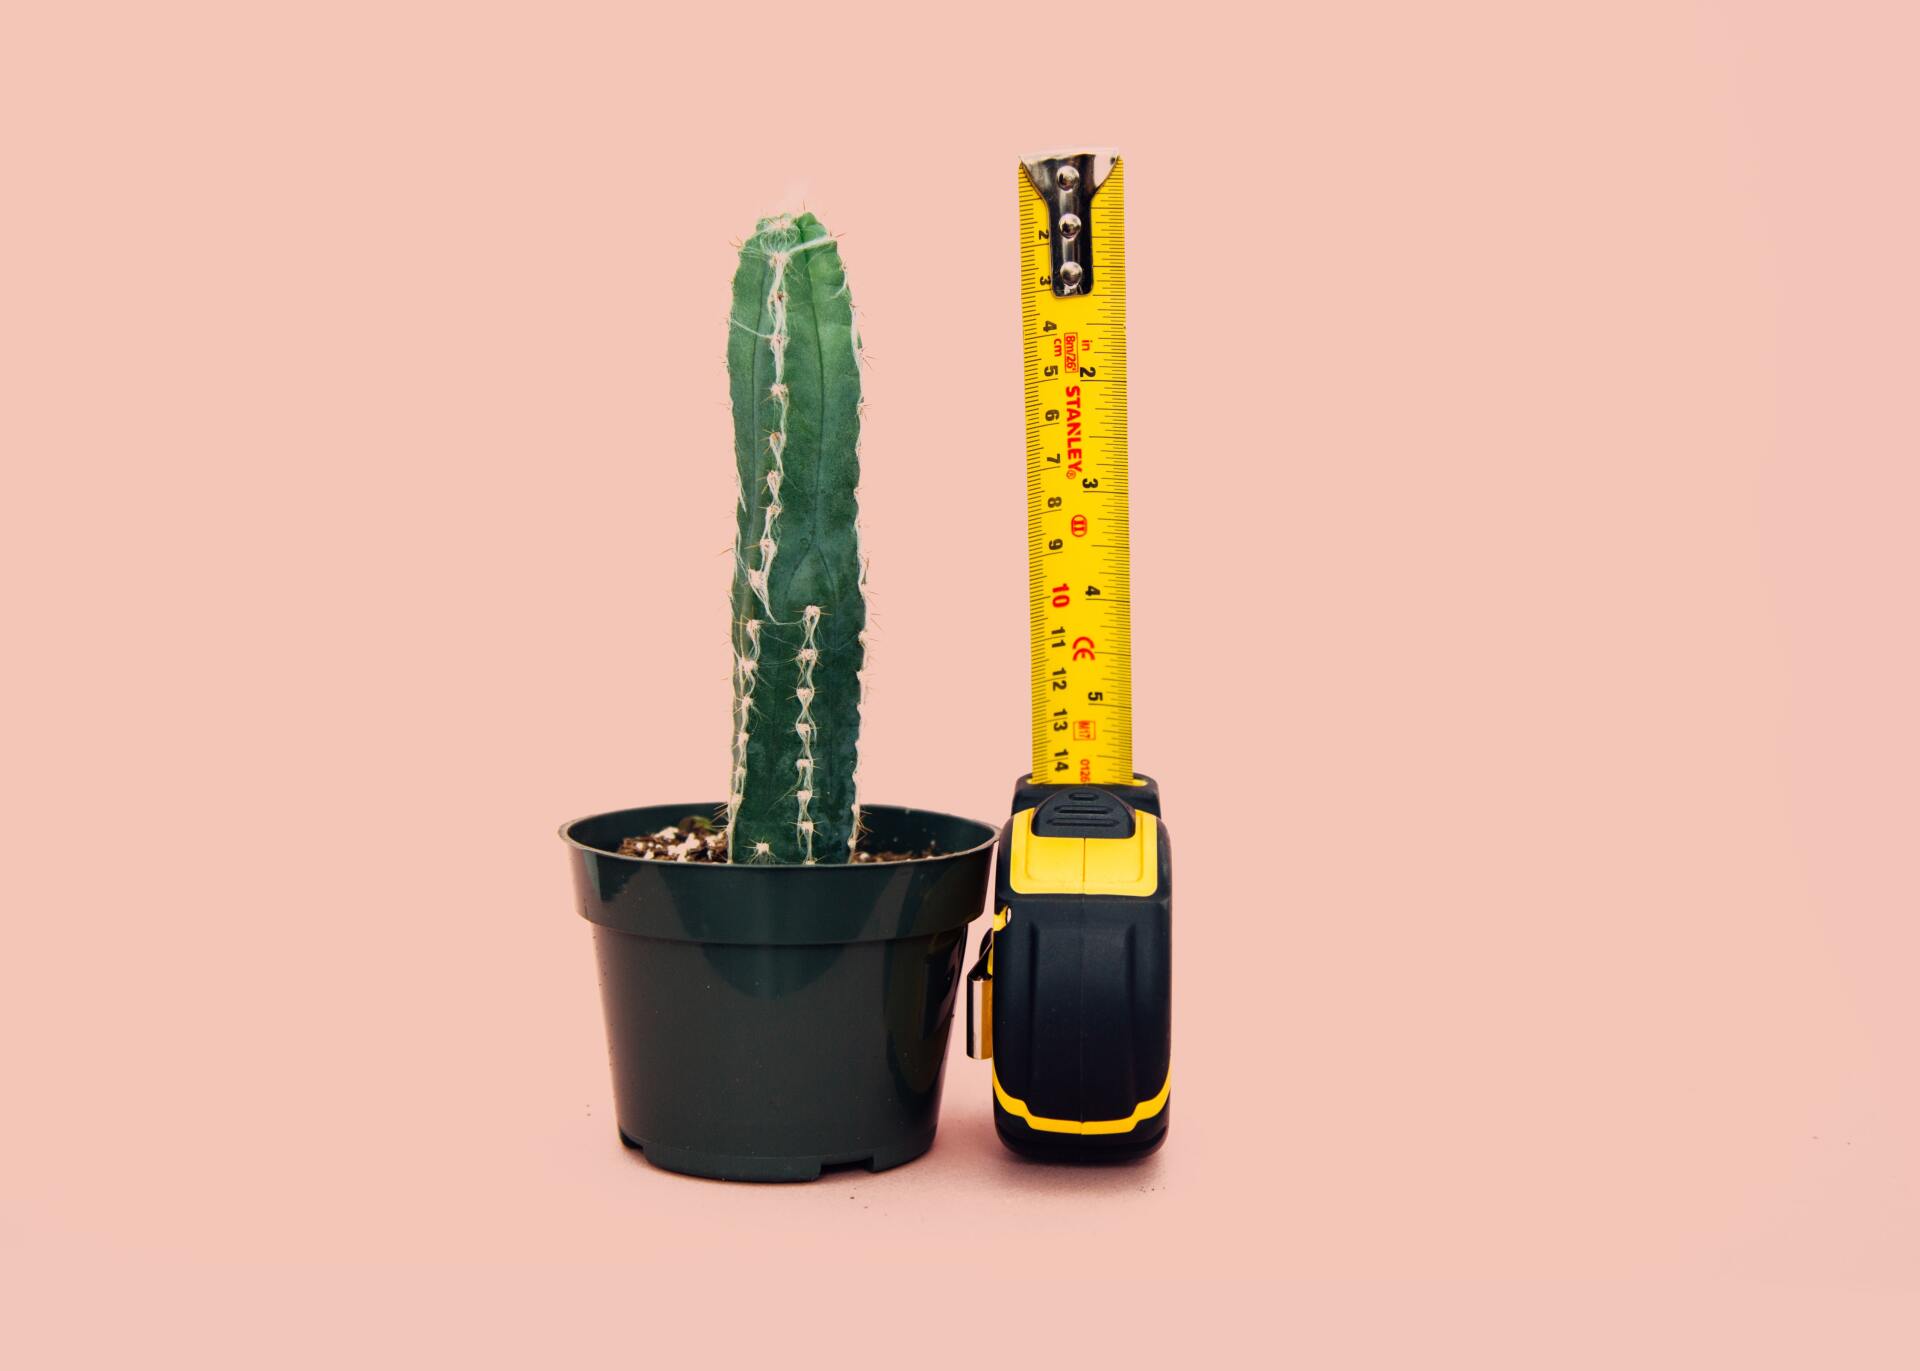 Measuring a plant using a tape measure. With thanks to Charles Deluvio at Unsplash.